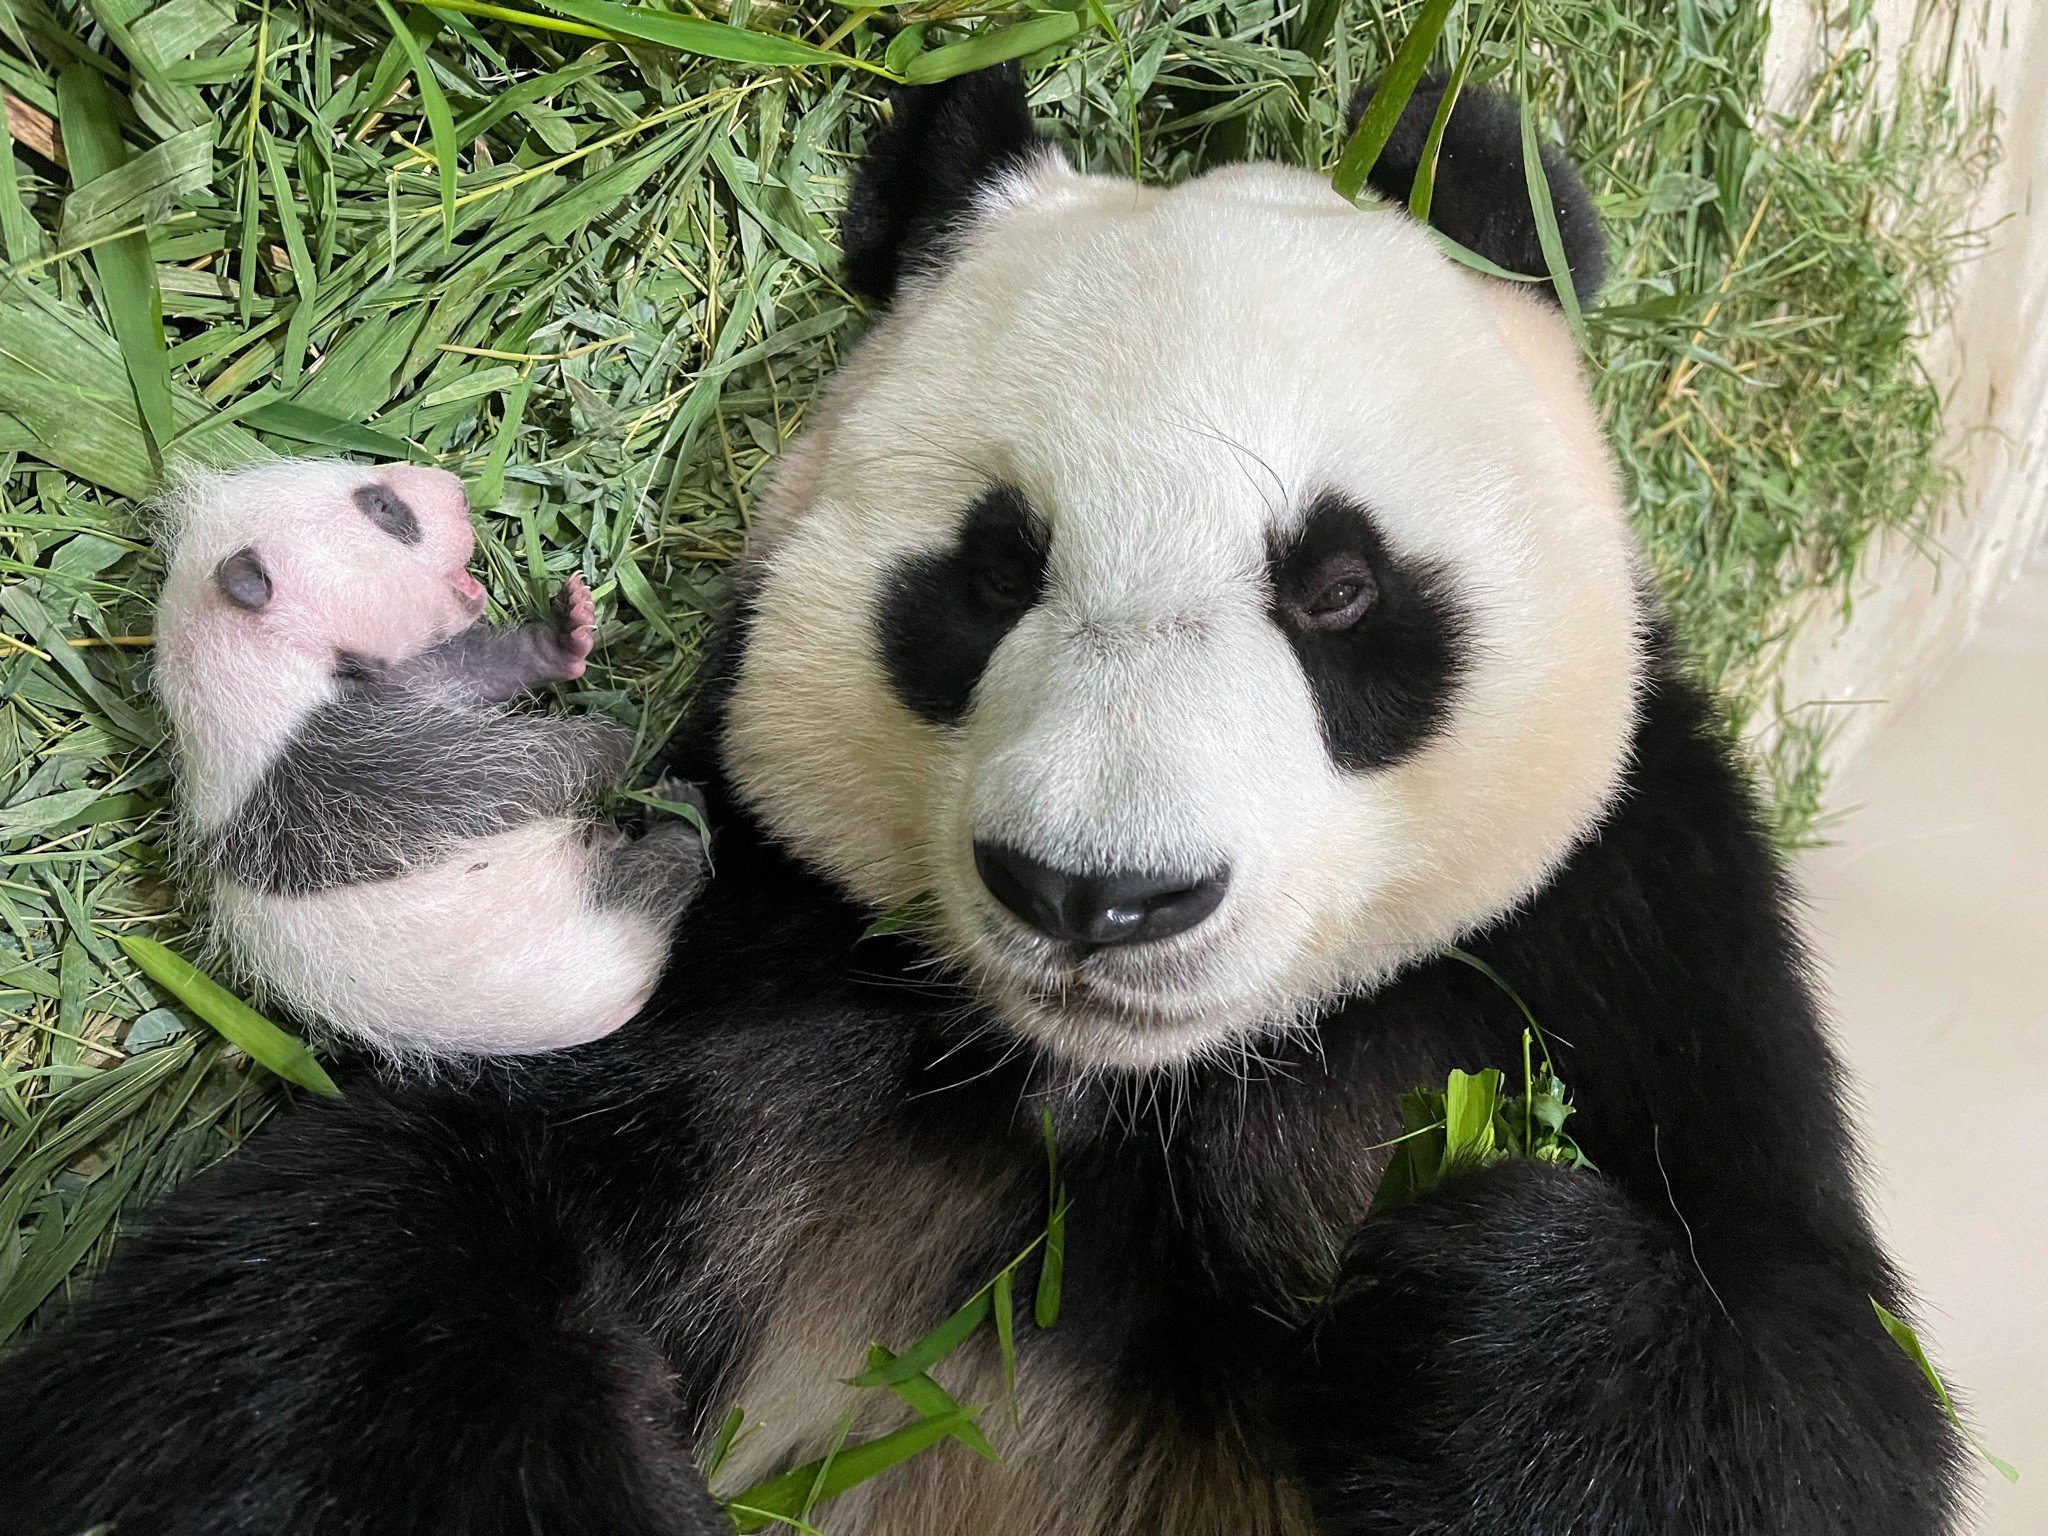 Newly named Chinese panda cub Le Le with her mother Jia Jia in Singapore. Photo: Wildlife Reserves Singapore